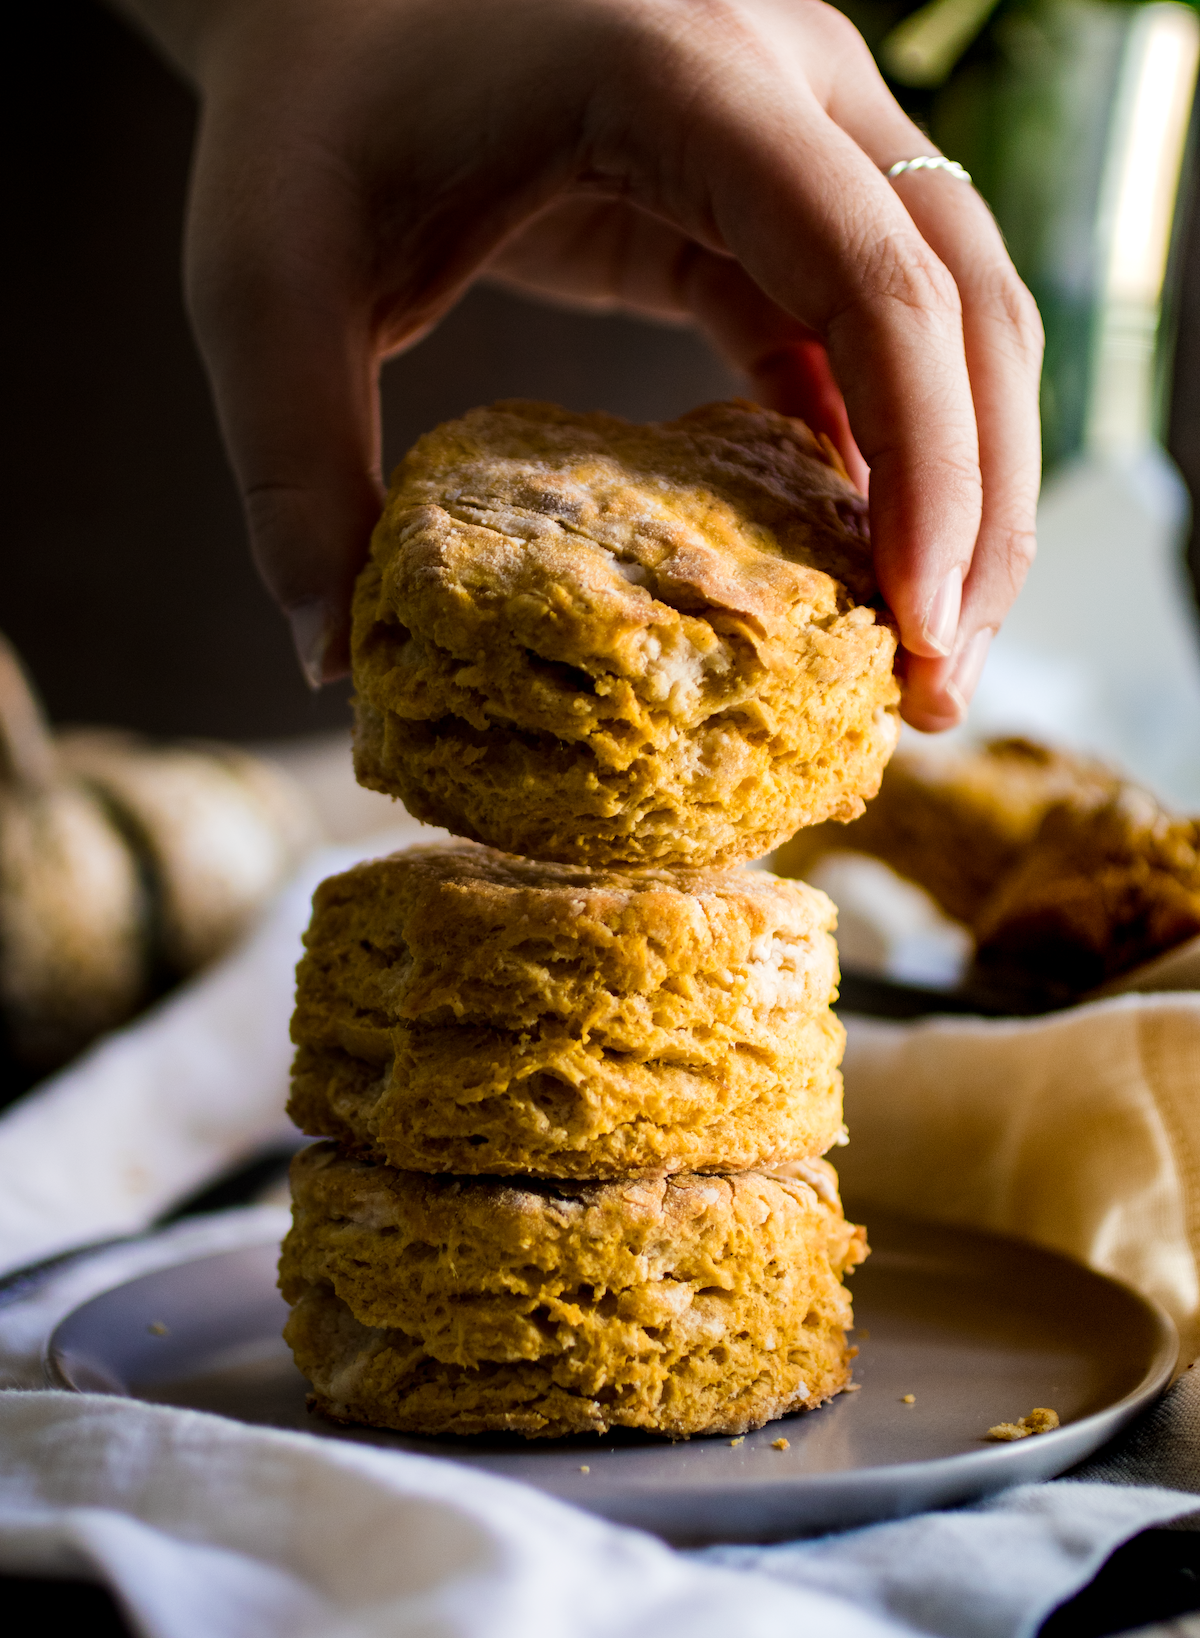 Woman's hand placing a pumpkin biscuit on top of two other biscuits to form a stack.